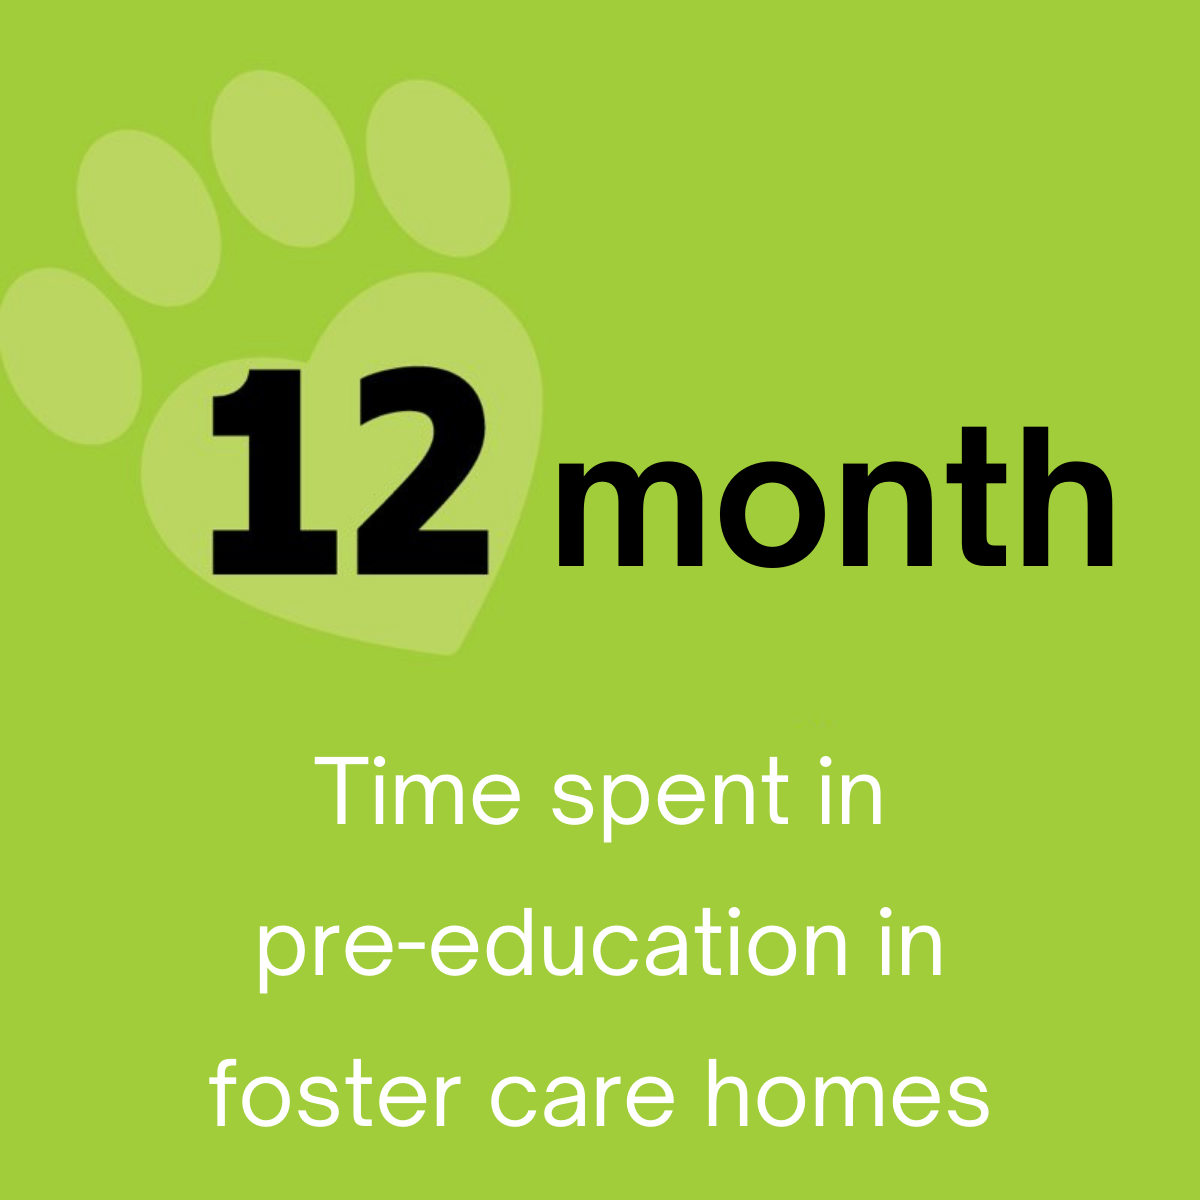 12 month time spent in pre-education in foster care homes